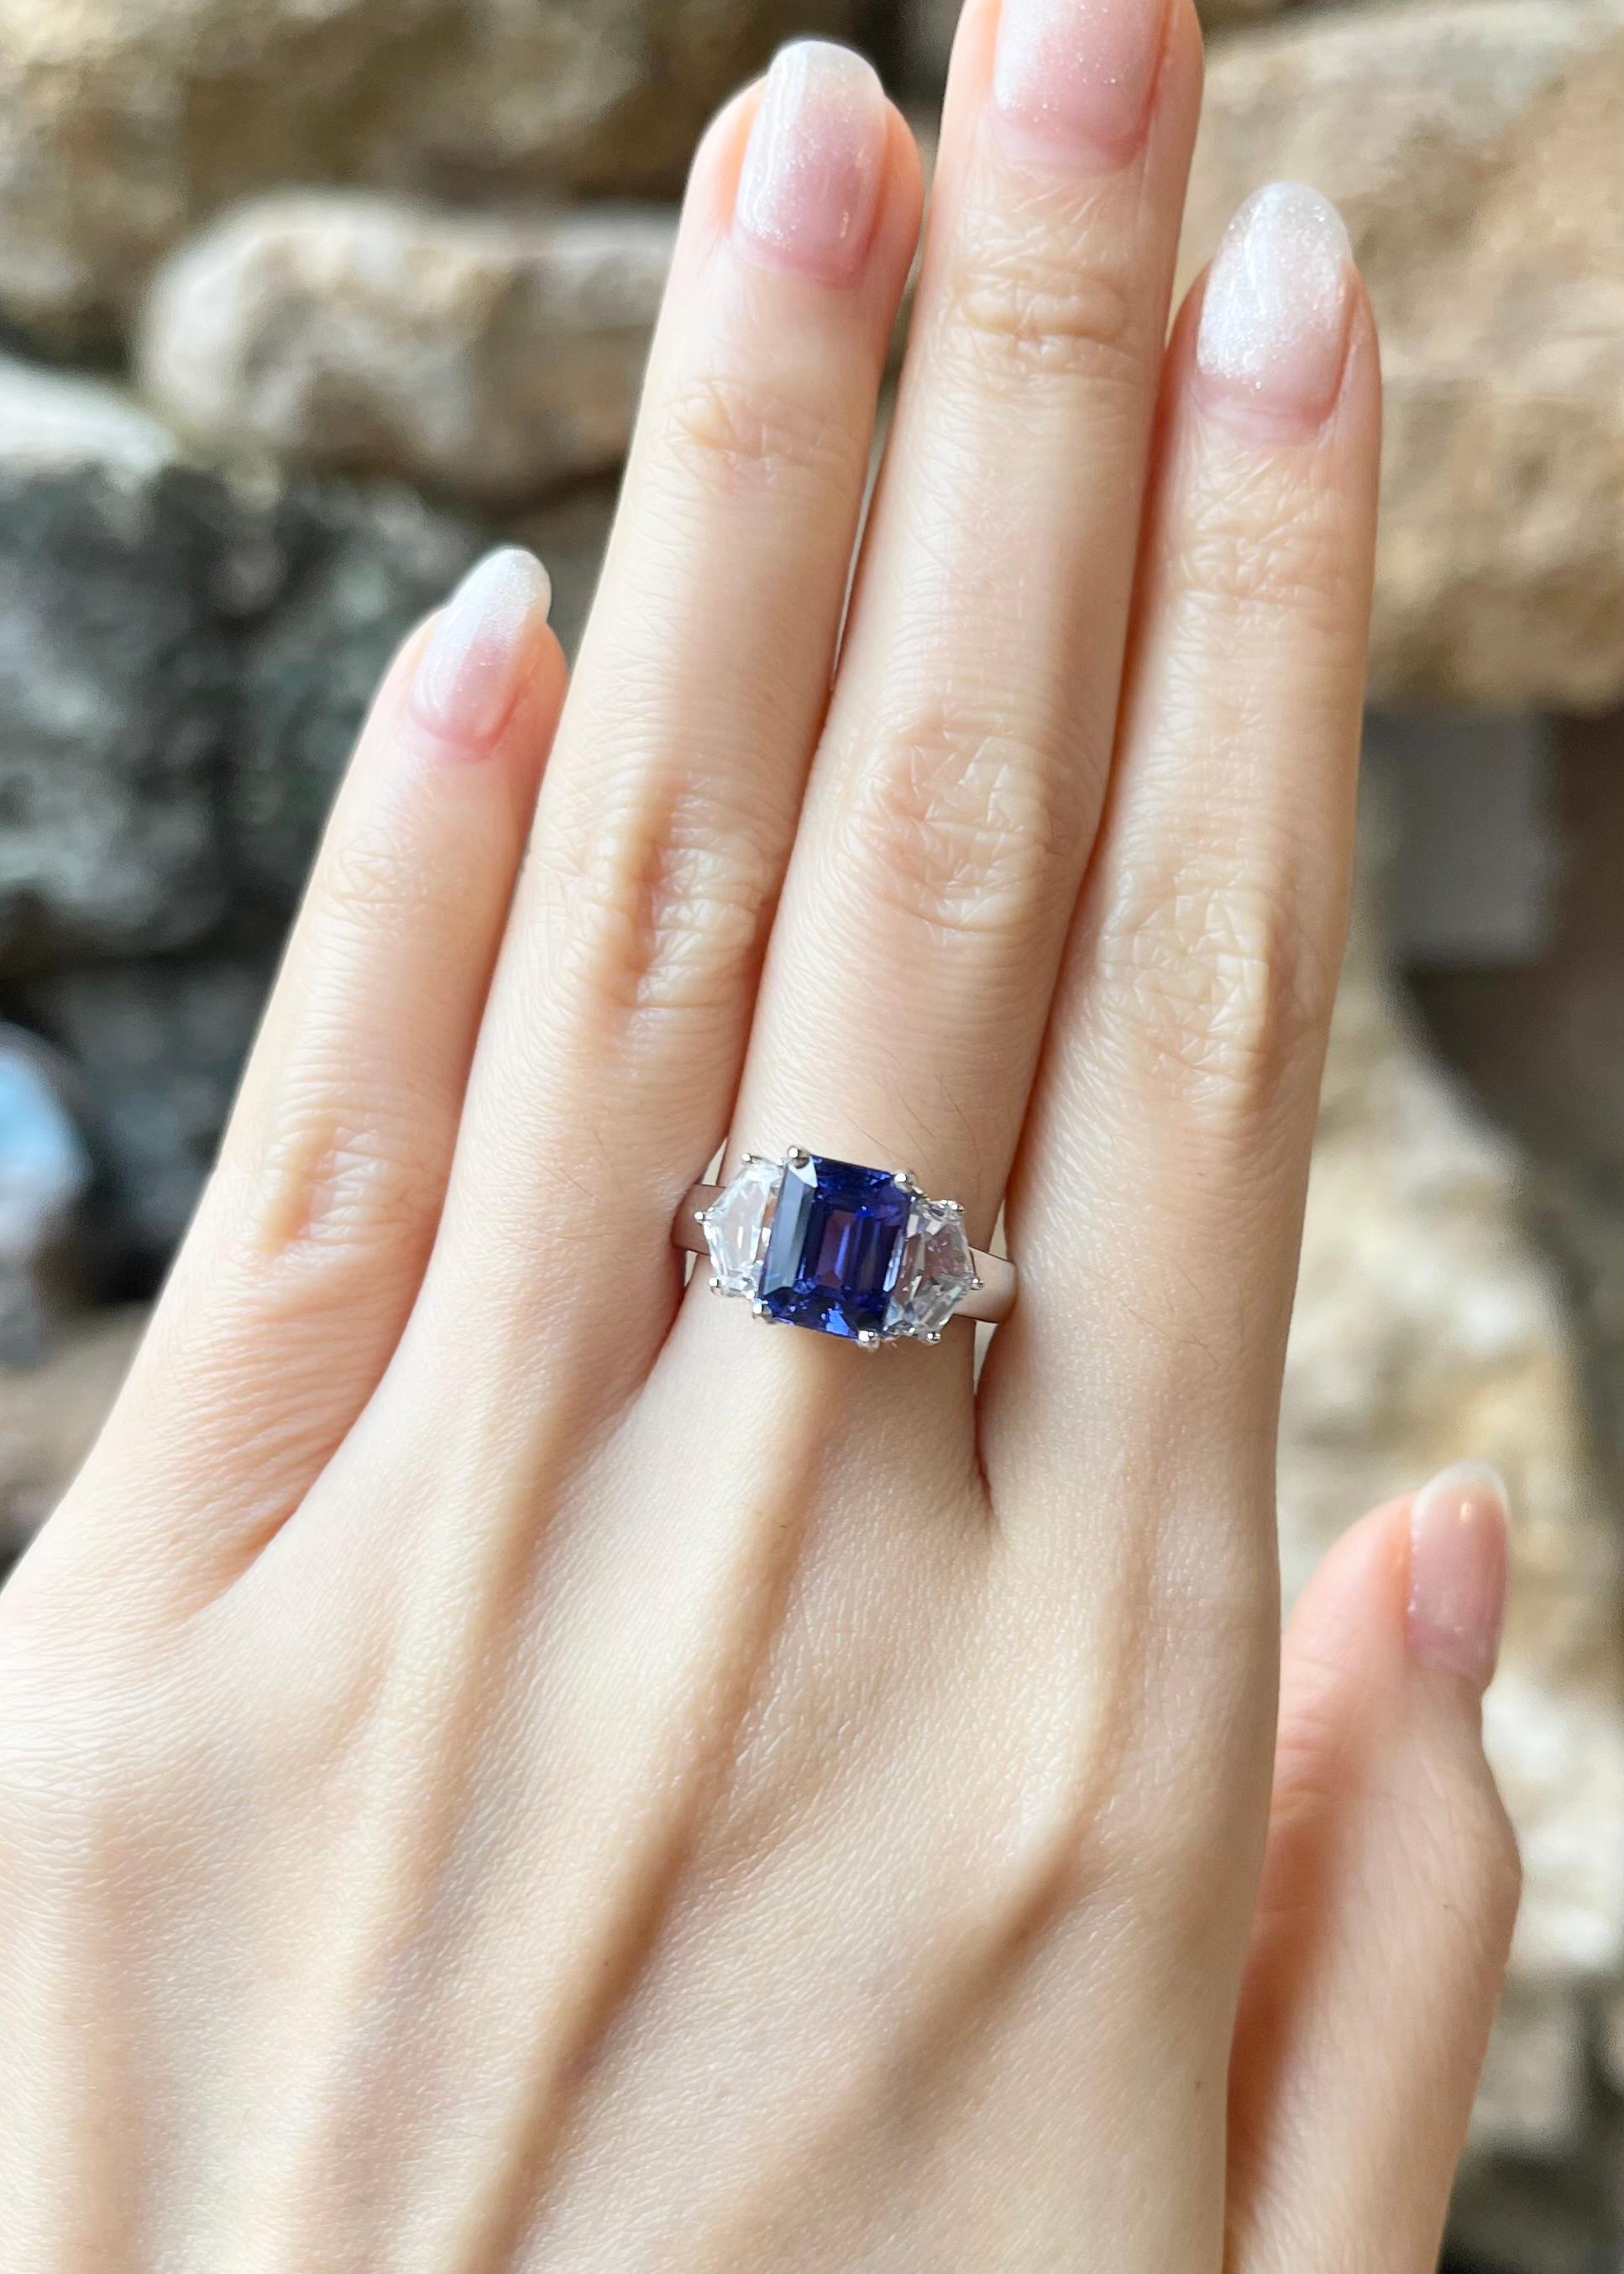 Tanzanite 2.88 carats with White Sapphire 1.89 carat Ring set in 18K White Gold Settings

Width:  1.5 cm 
Length: 0.9 cm
Ring Size: 52
Total Weight: 6.67 grams

